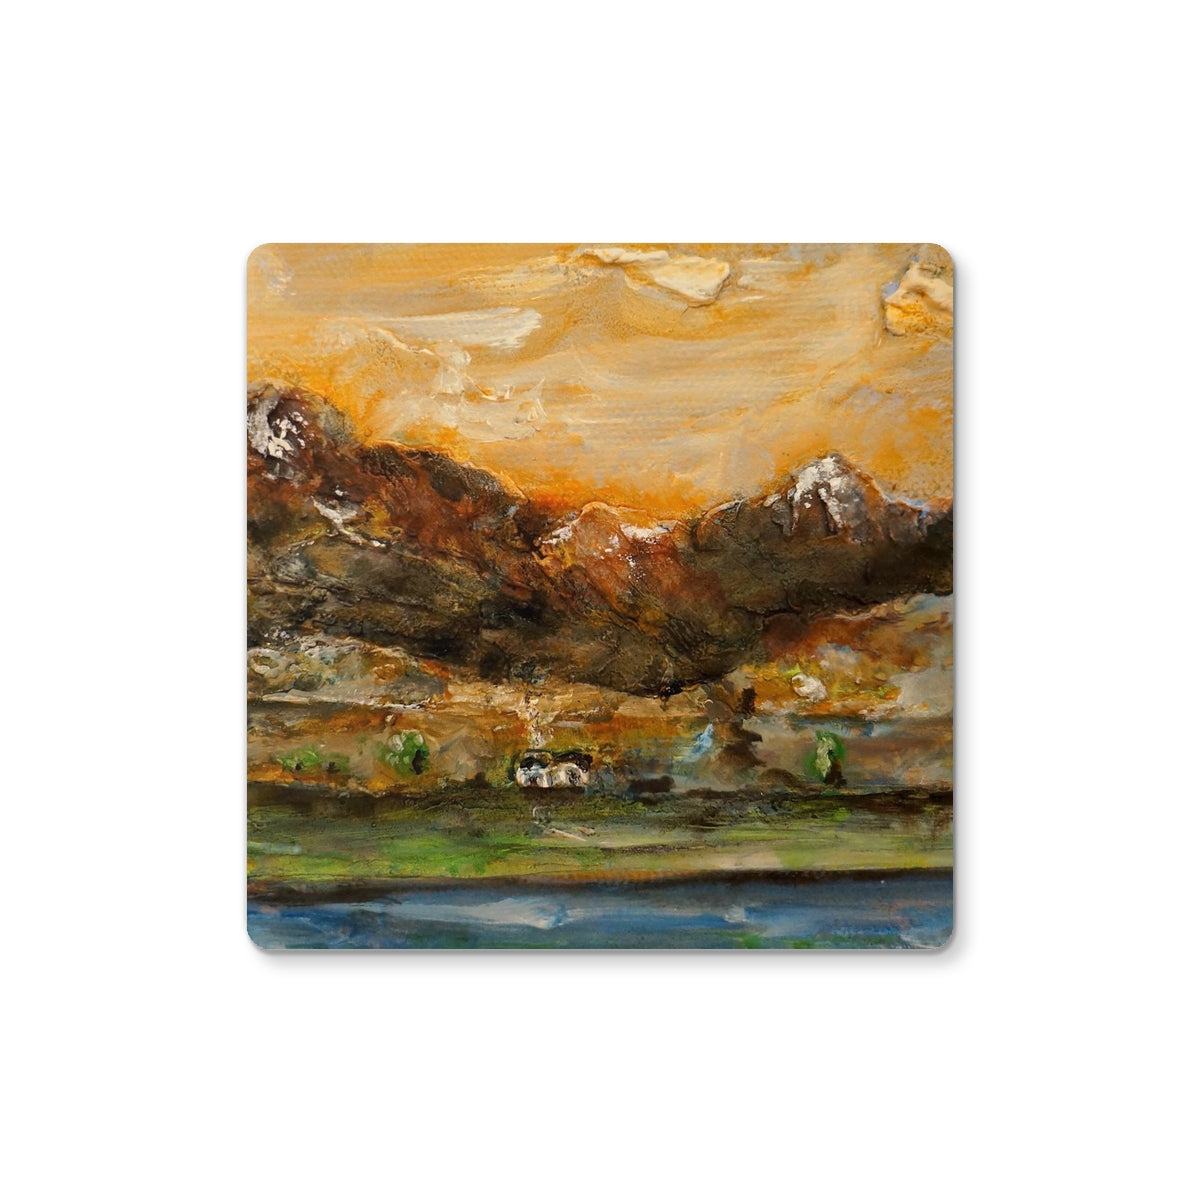 A Glencoe Cottage Art Gifts Coaster-Coasters-Glencoe Art Gallery-4 Coasters-Paintings, Prints, Homeware, Art Gifts From Scotland By Scottish Artist Kevin Hunter